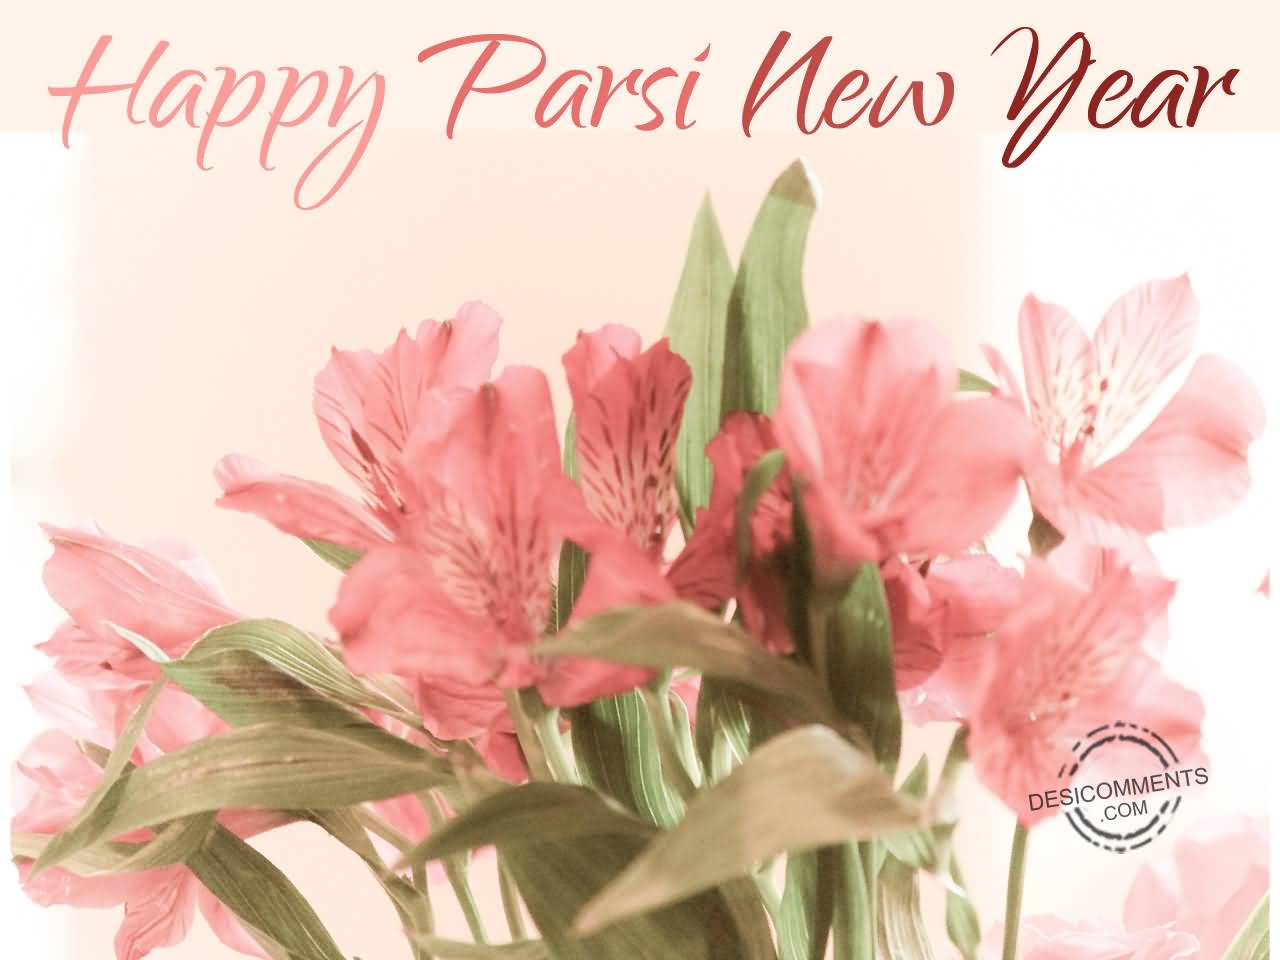 Happy Parsi New Year Wishes With Flowers For You